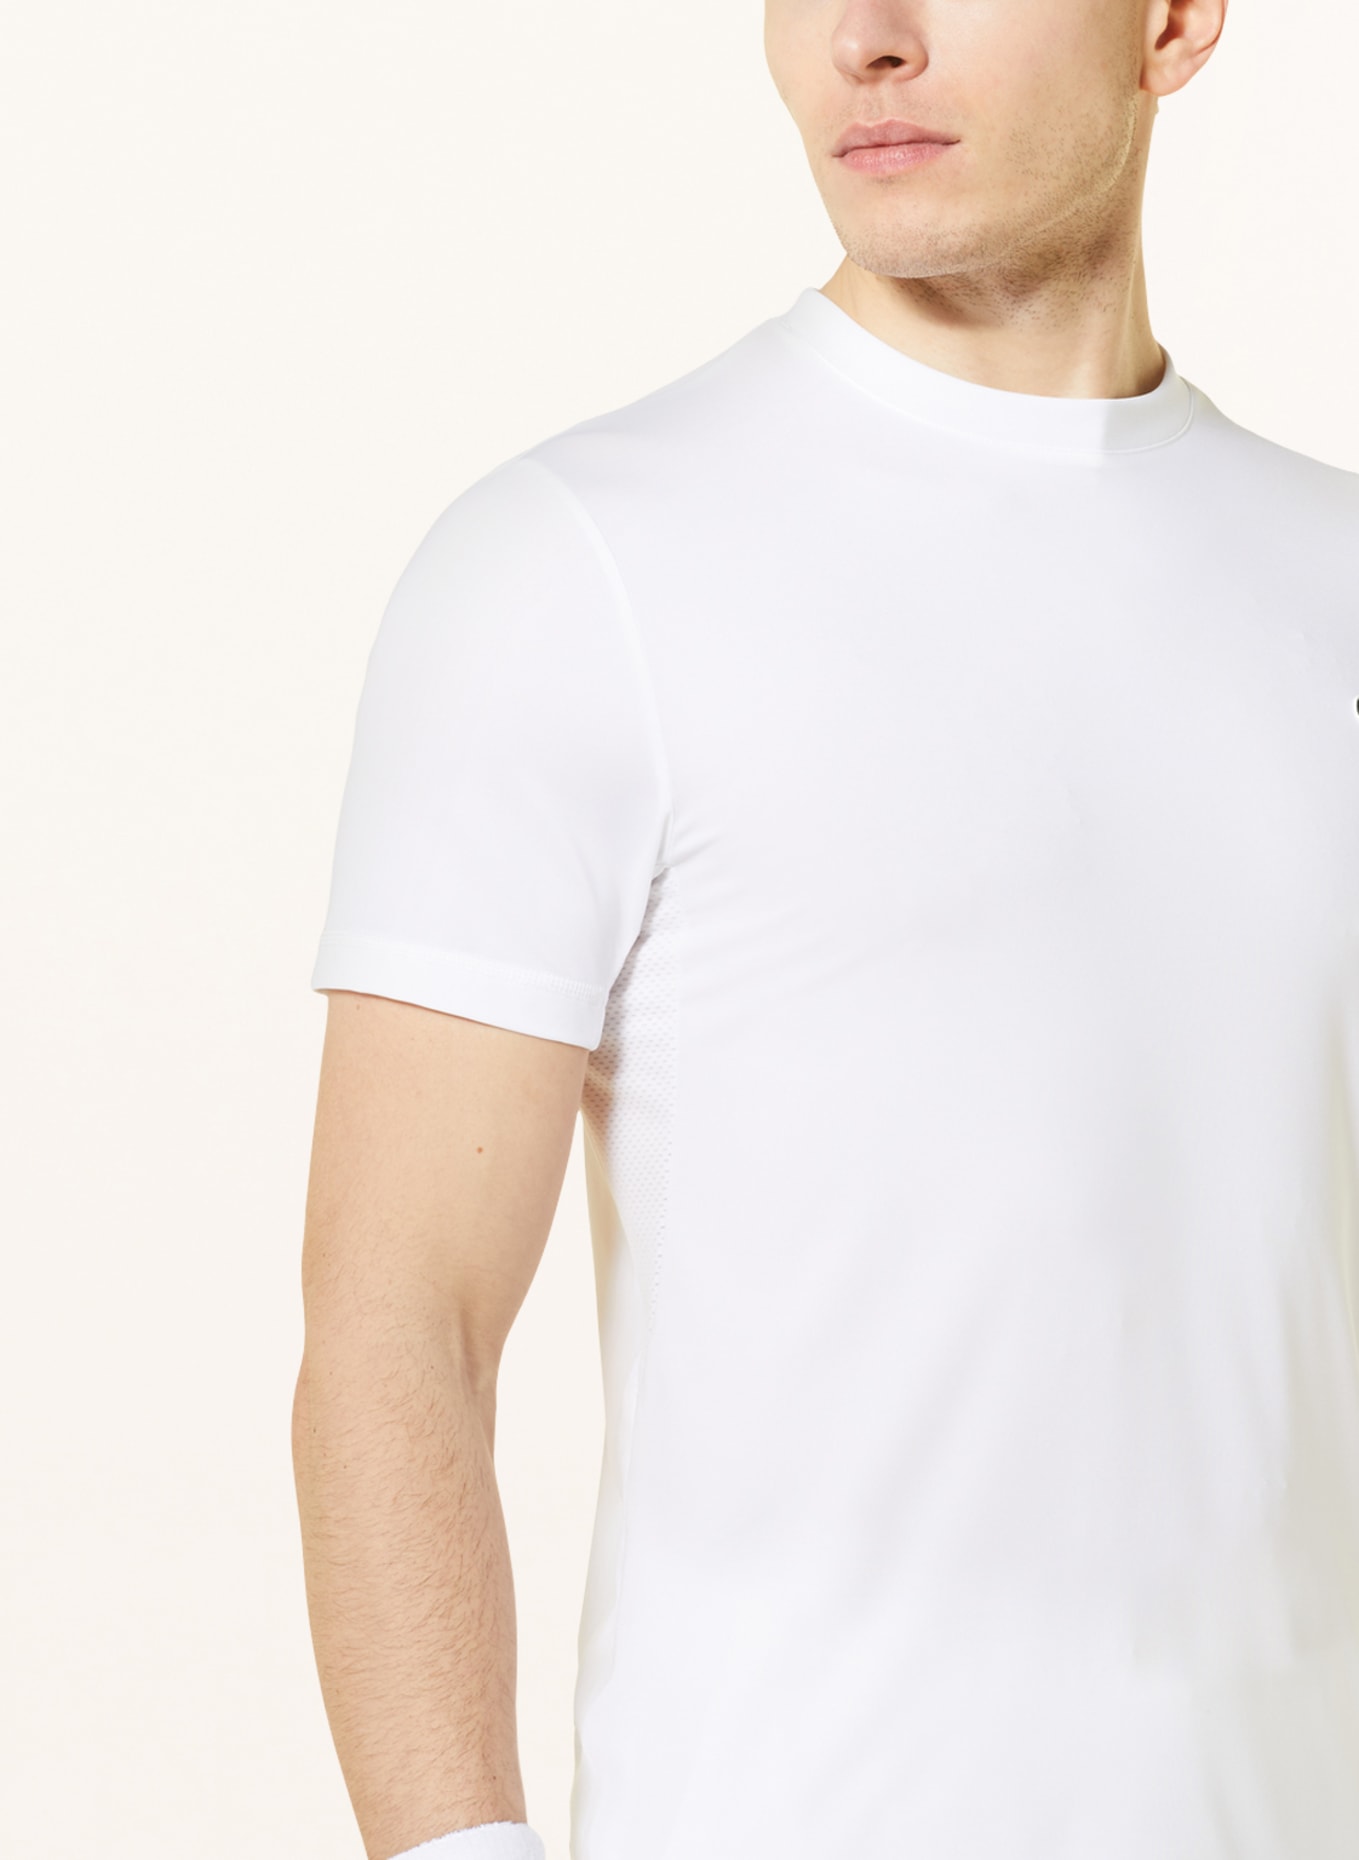 LACOSTE T-Shirt mit weiss Mesh in